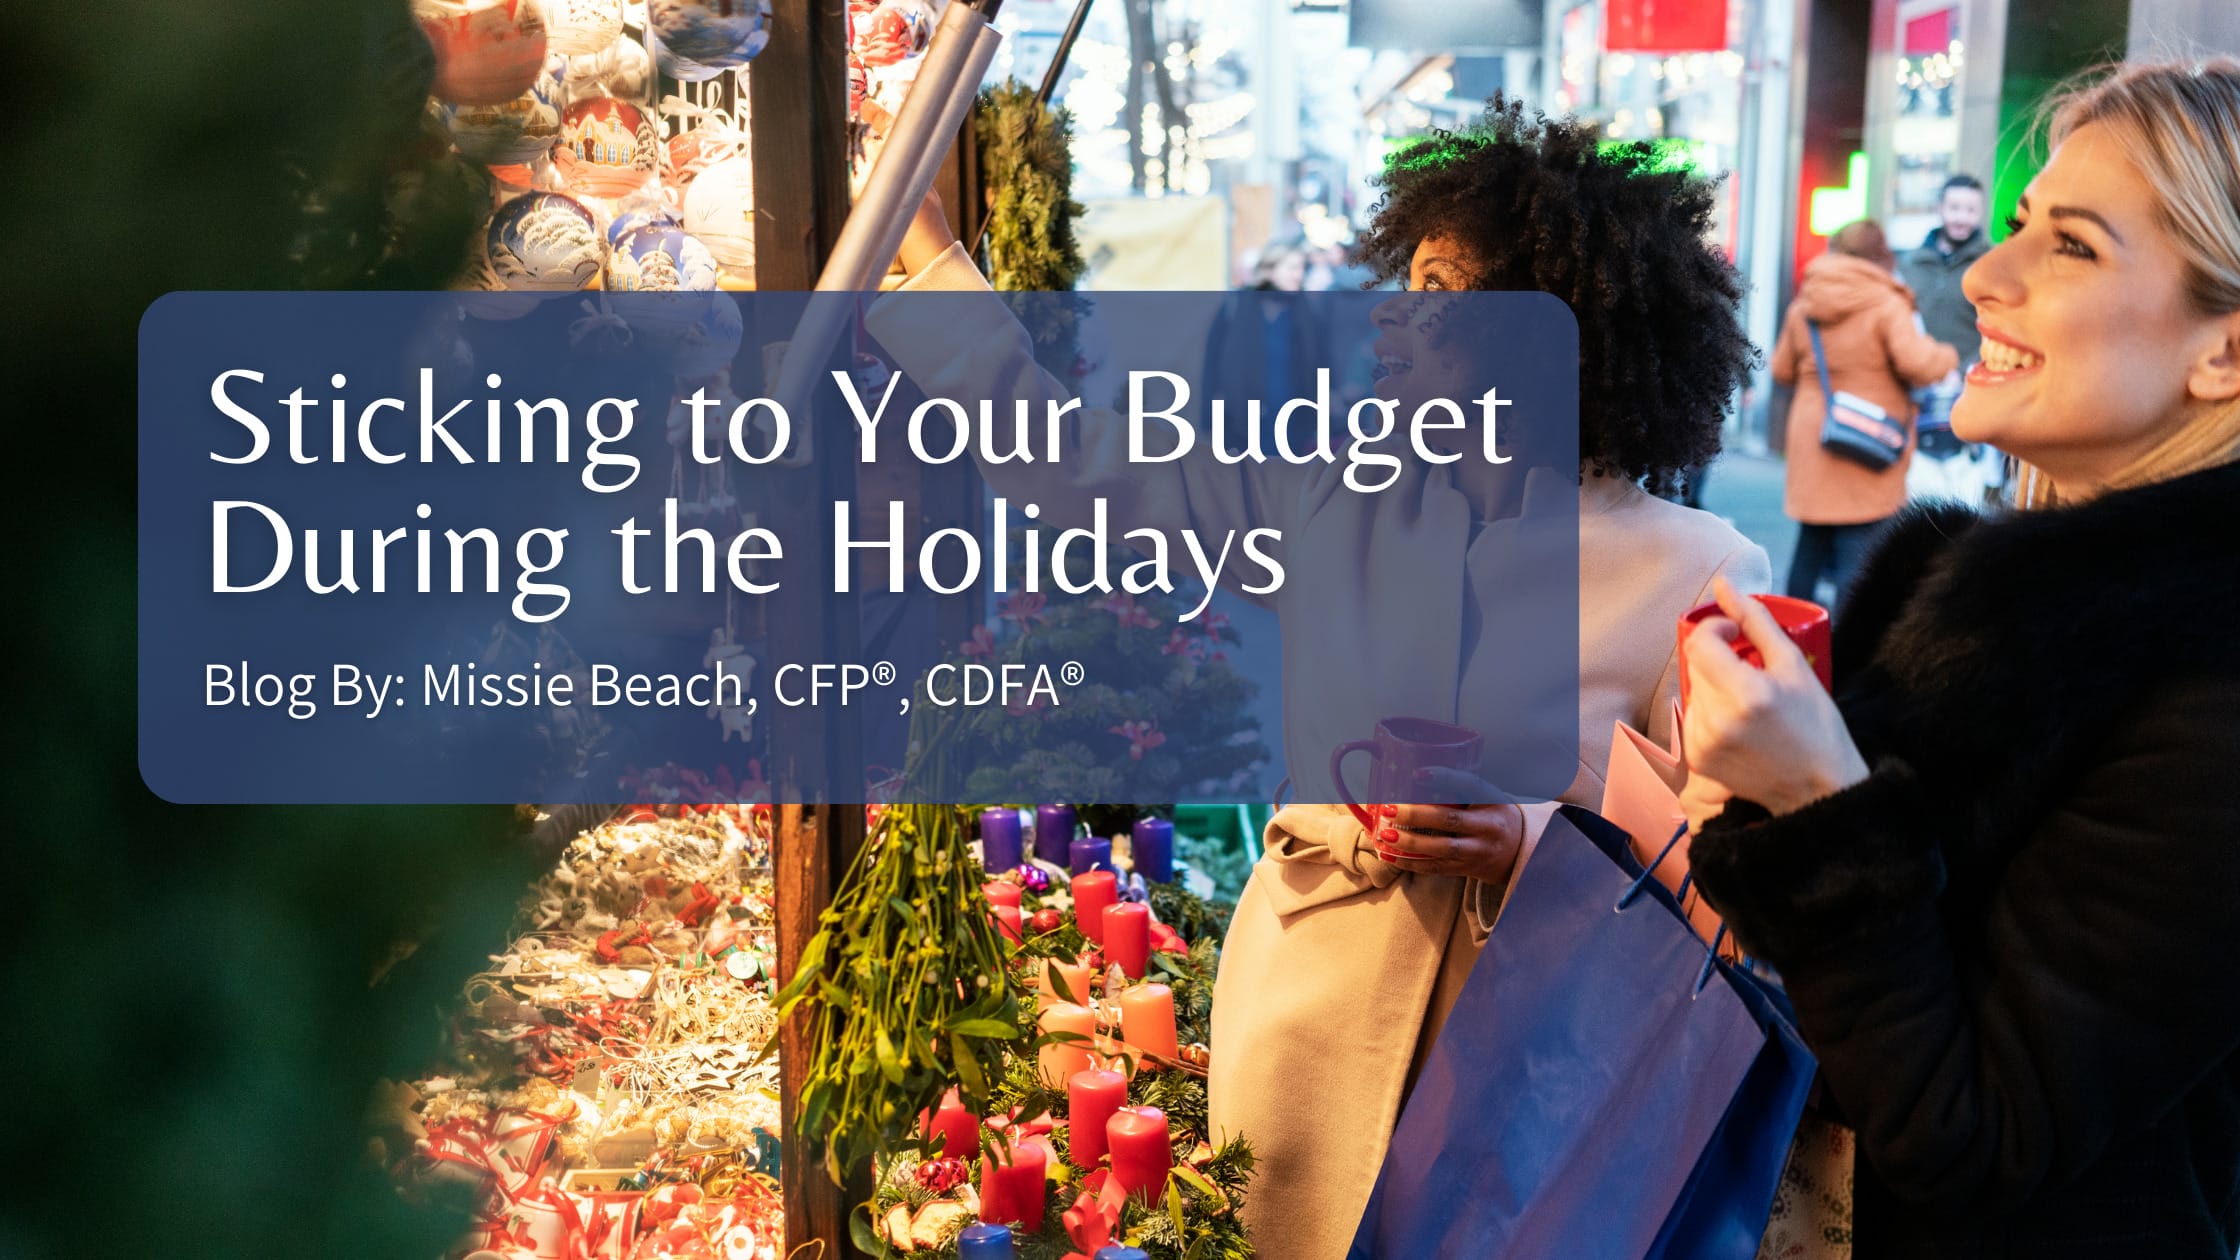 Sticking to Your Budget During the Holidays